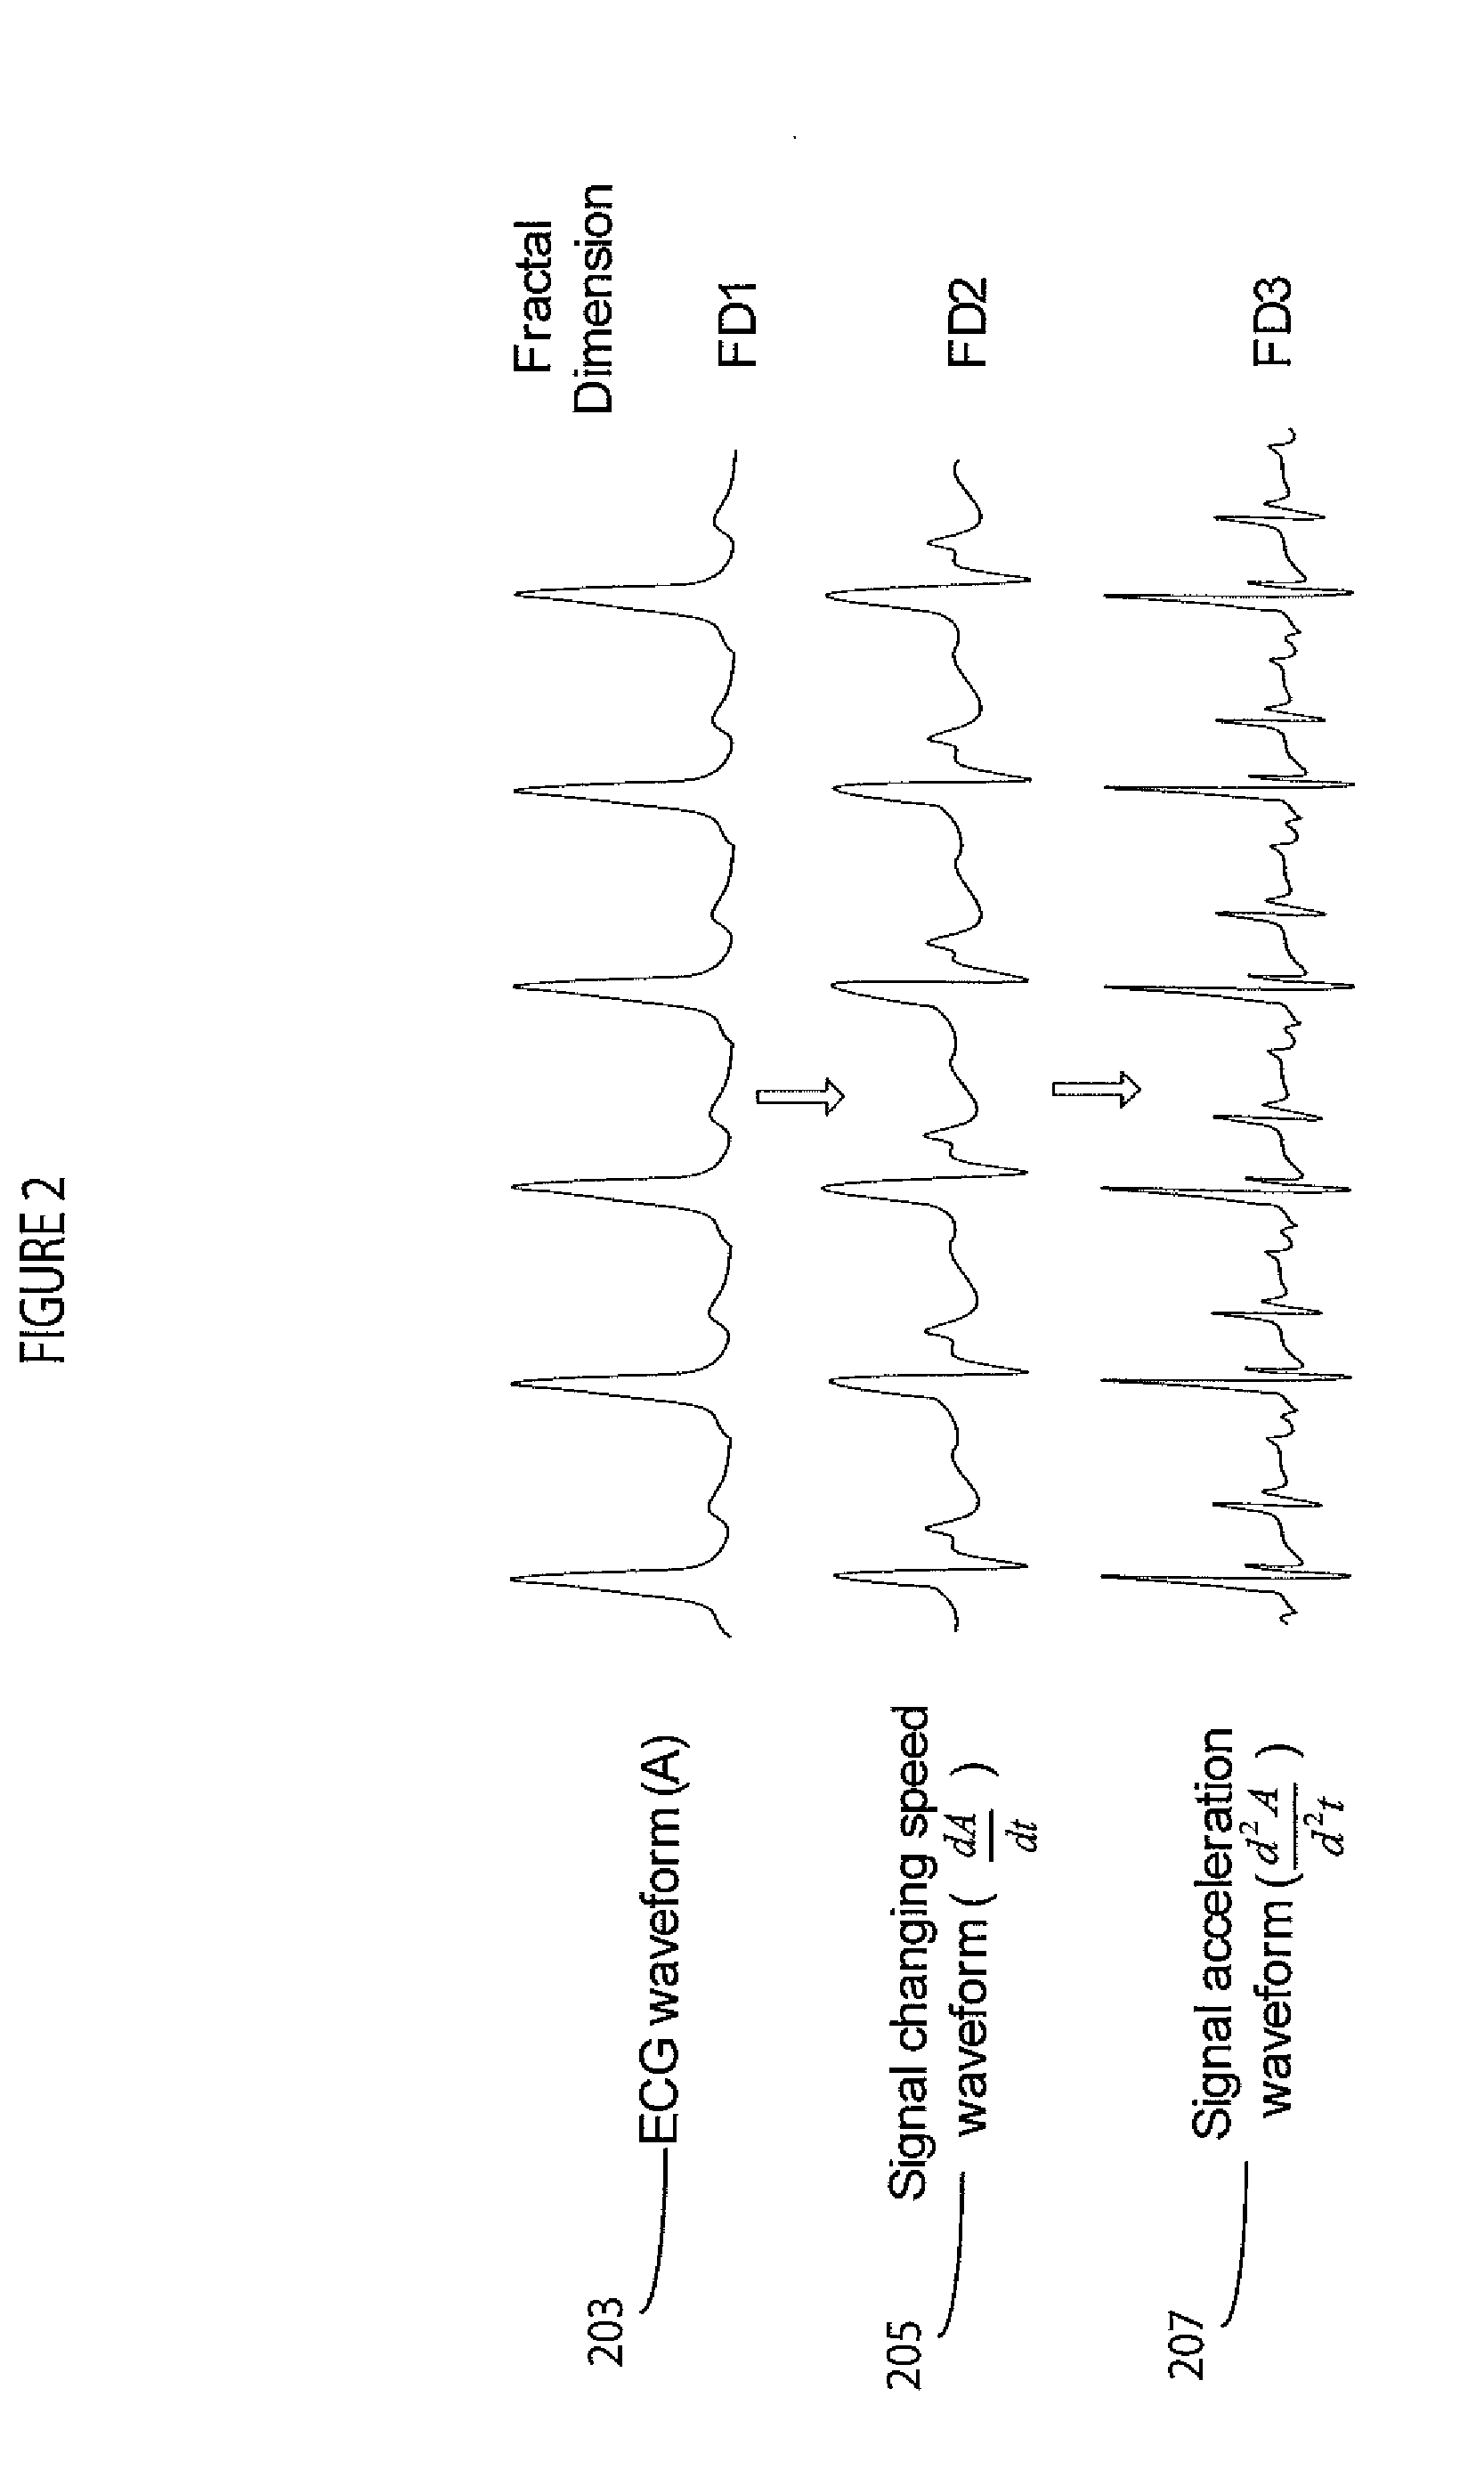 System for Continuous cardiac pathology detection and characterization